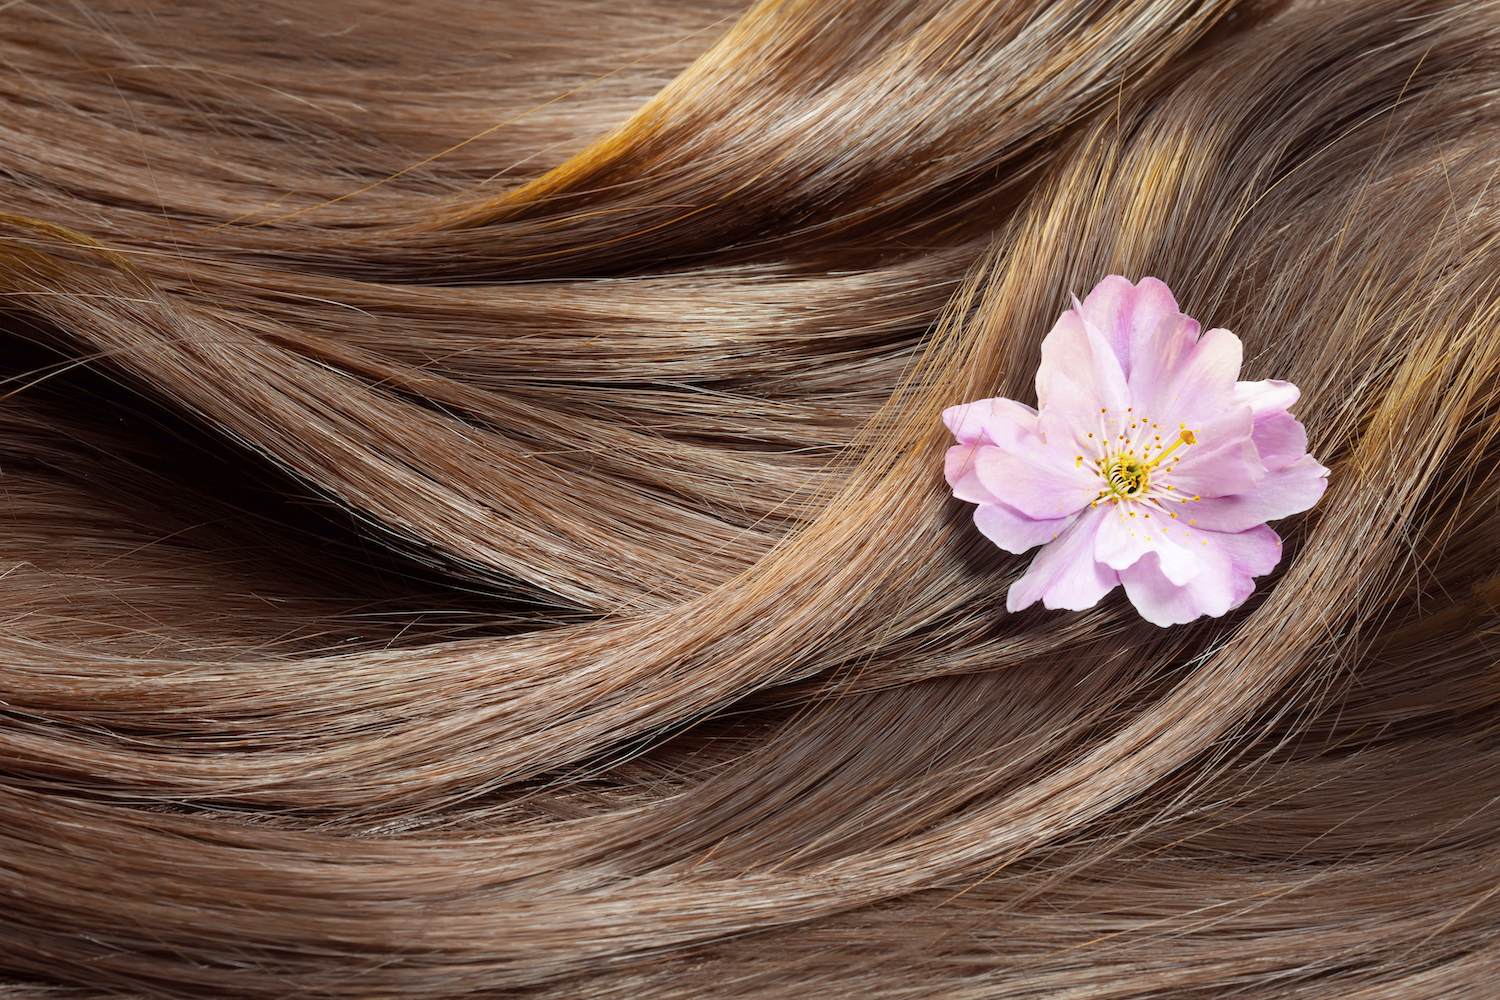 beautiful healthy shiny hair with highlighted golden streaks and a sakura flower